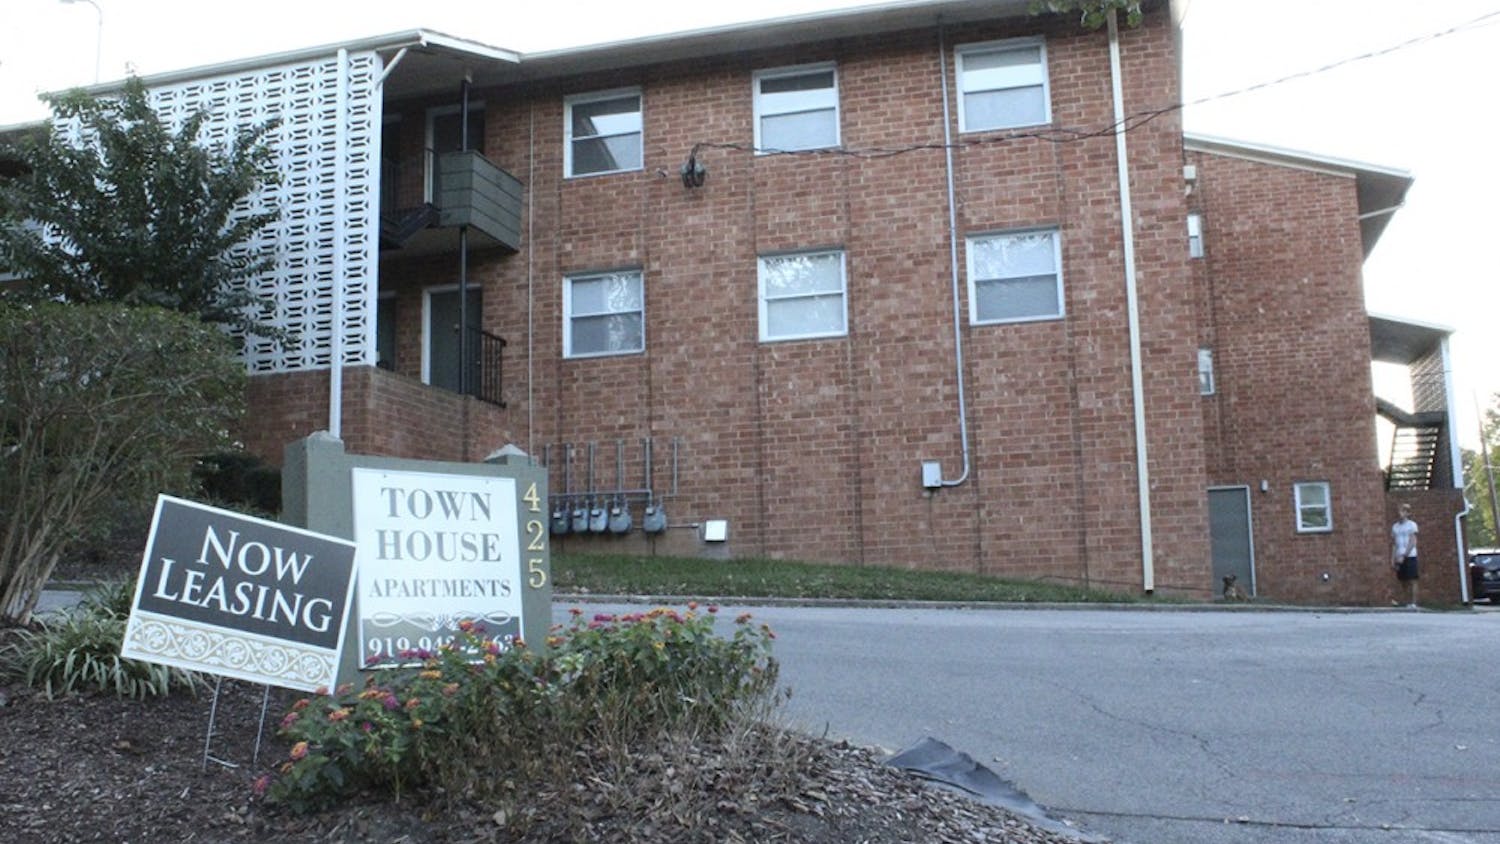 Townhouse Apartments located on Hillsborough are now leasing rooms. 